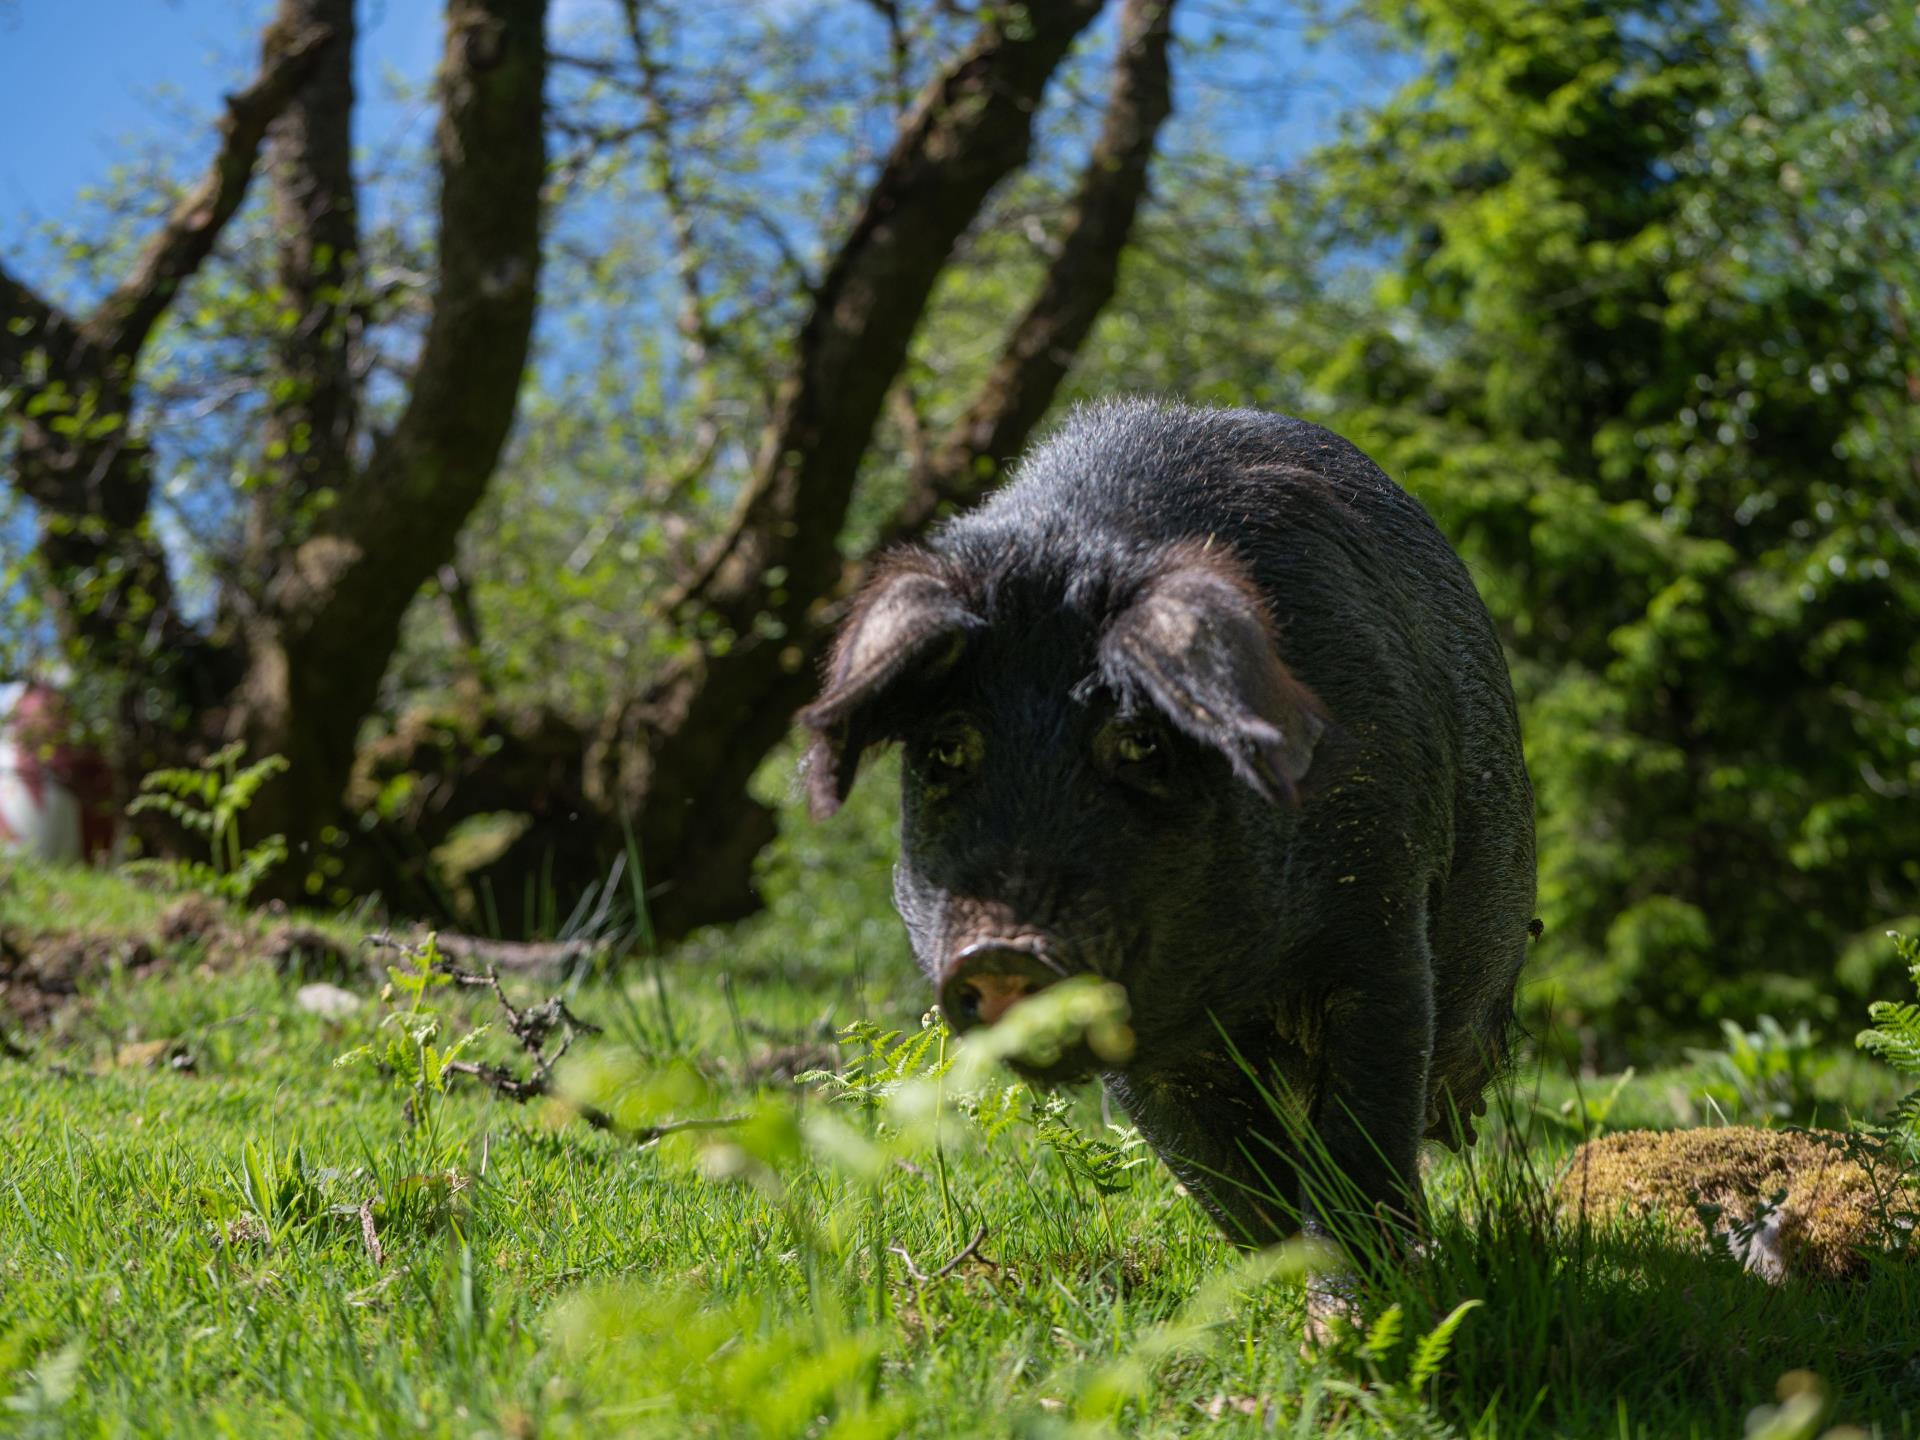 Roaming pigs are part of our rewilding project